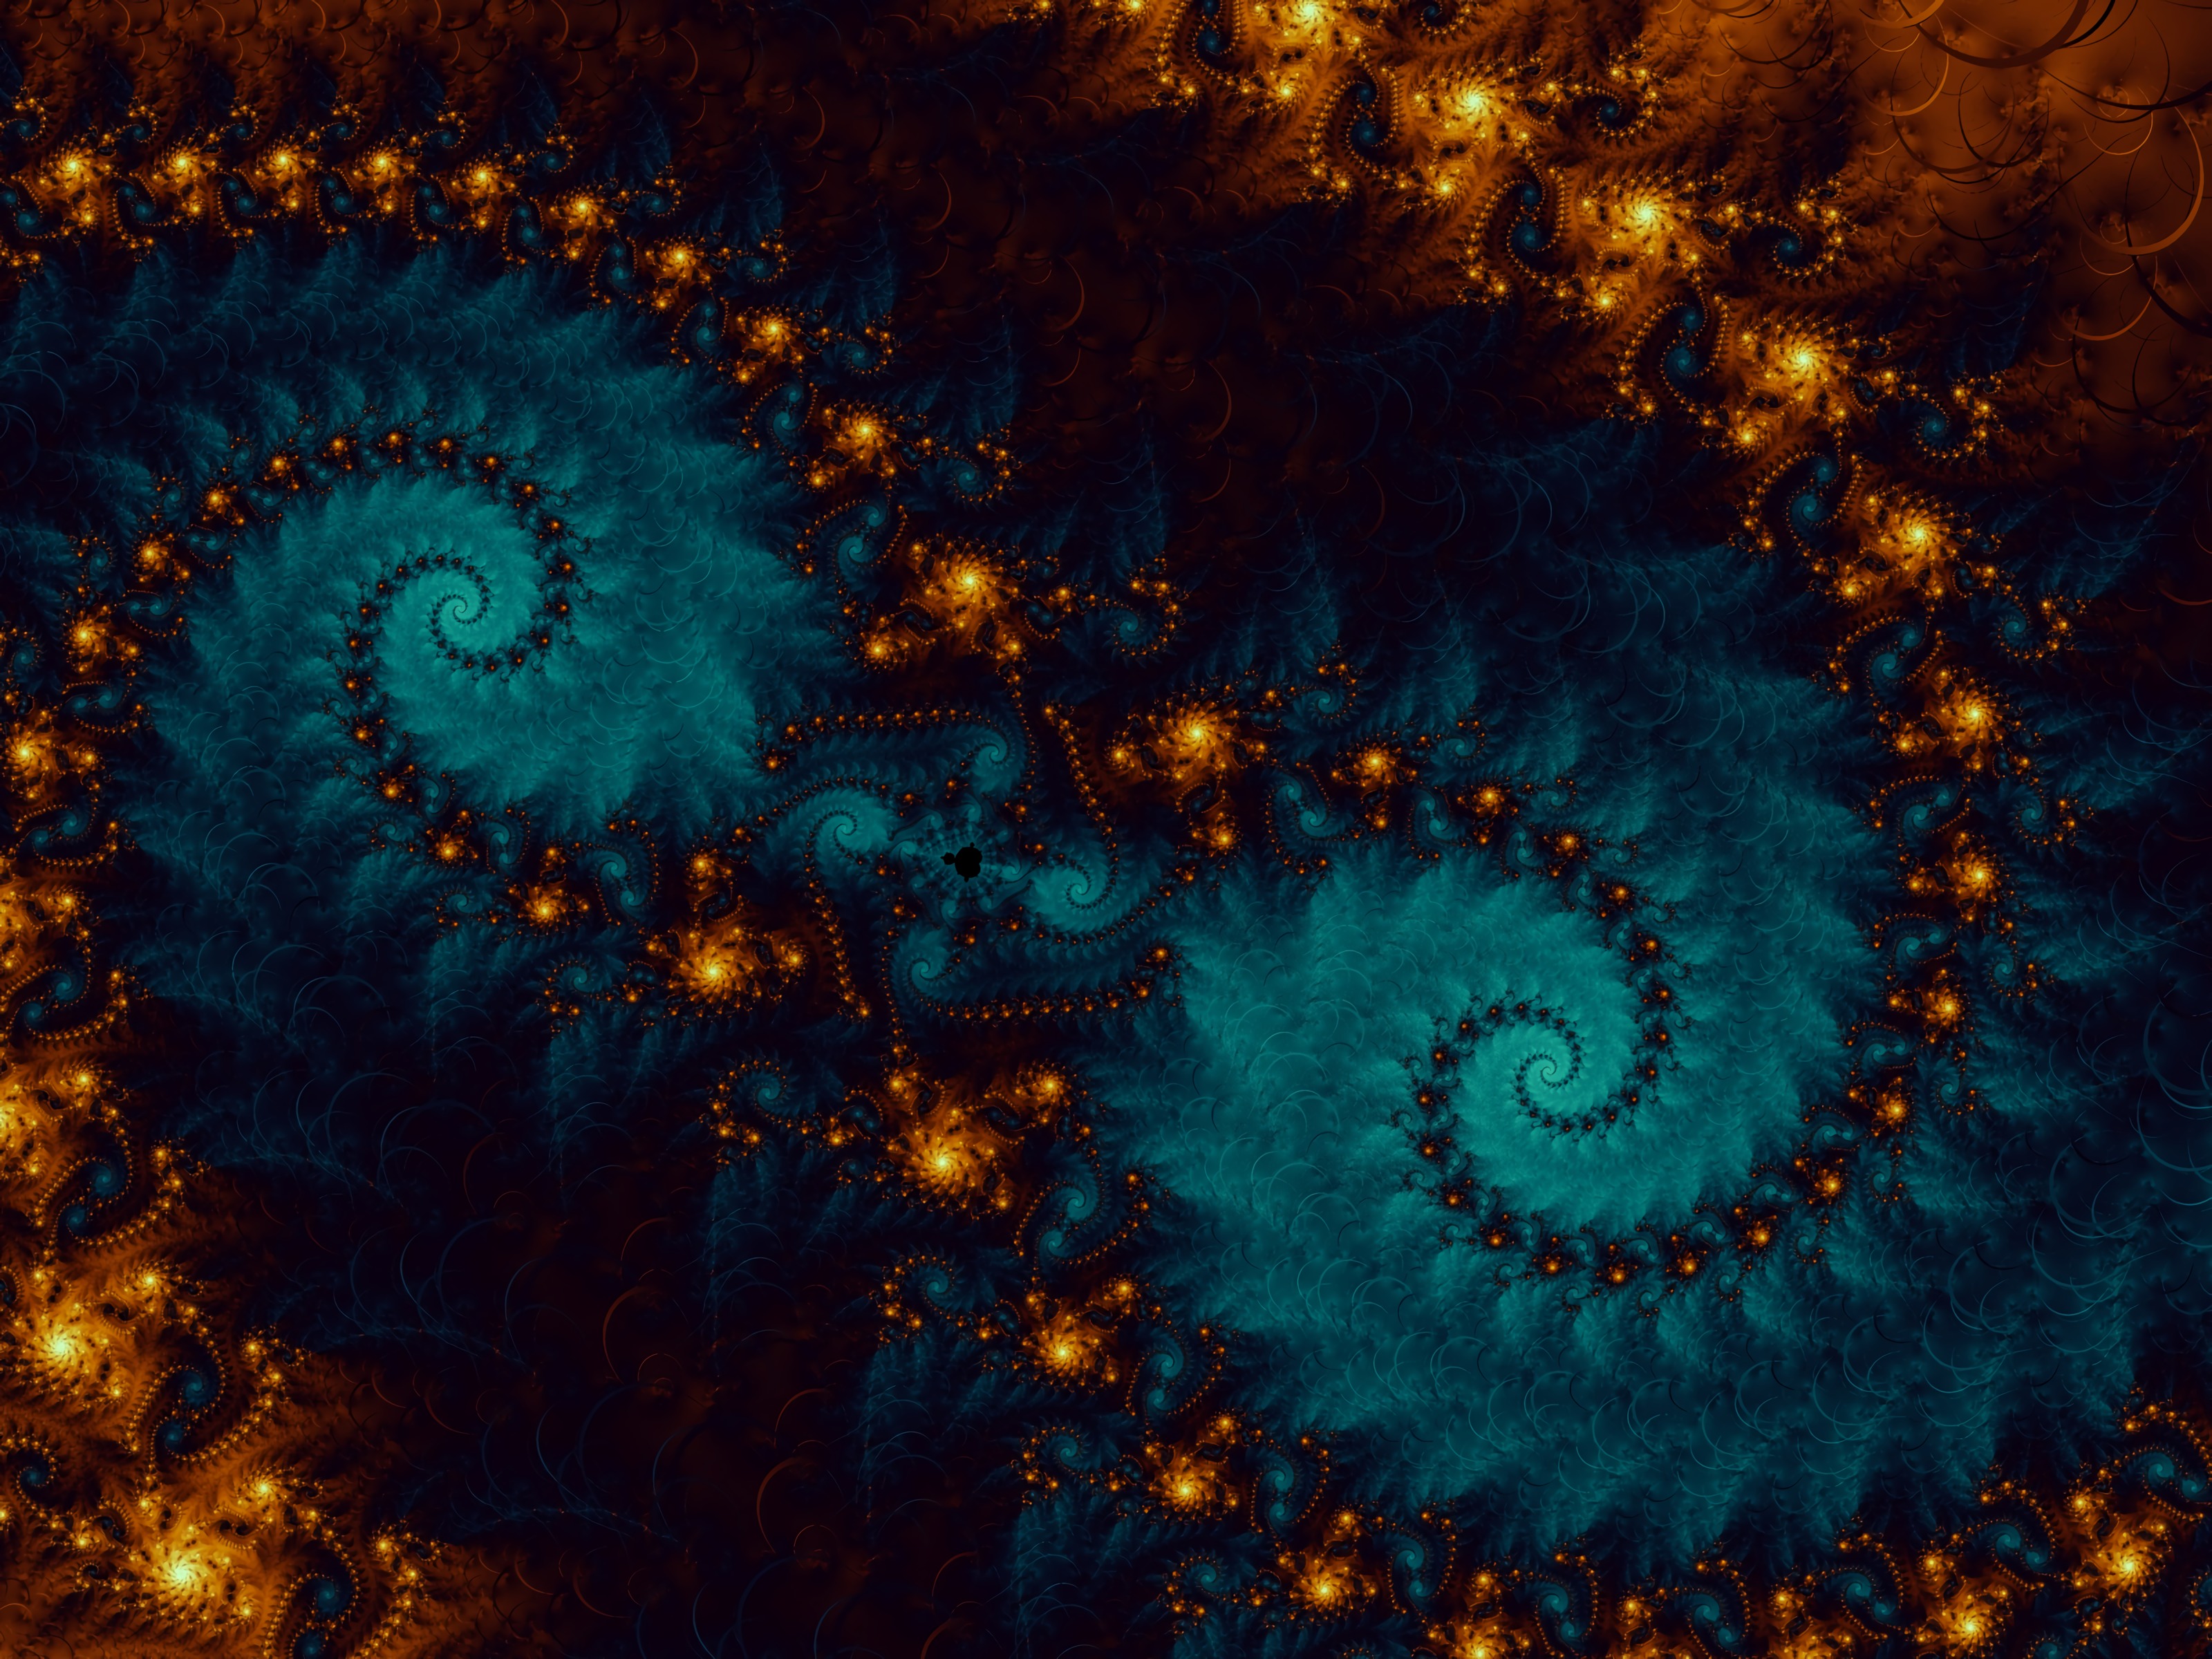 fractal, swirling, abstract, pattern, spiral, involute Full HD